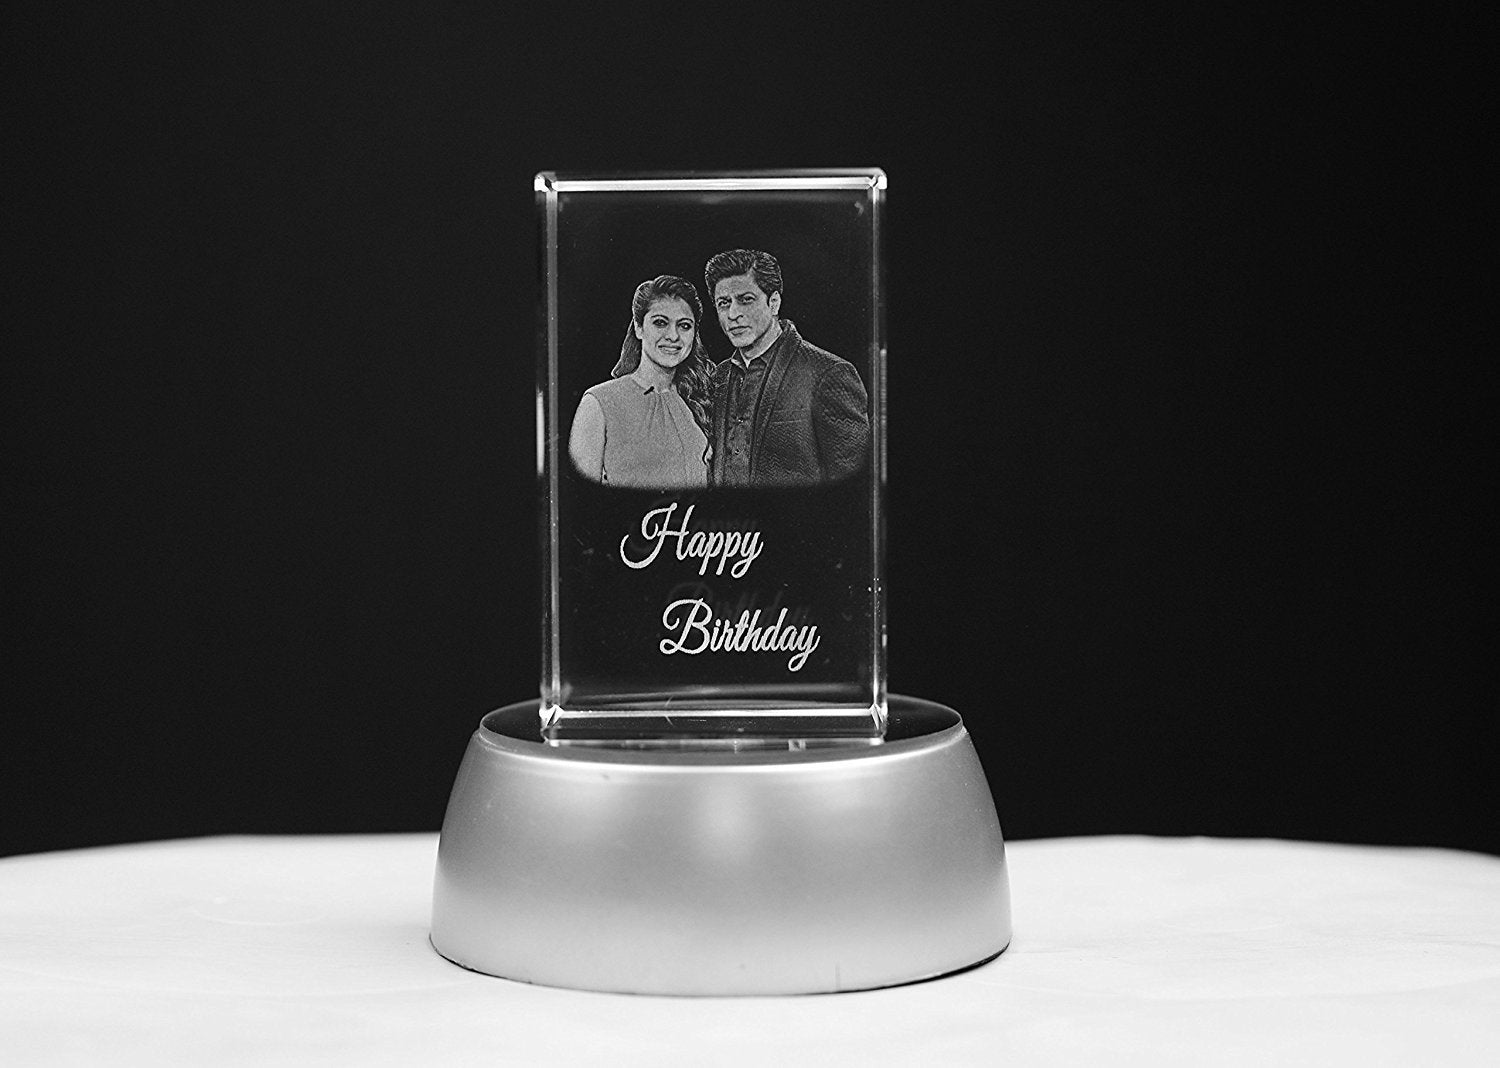 3D Picture Cube, 3D Photo Crystal, Crystal Photo Gifts, Crystal Photo, 3D Laser Engraving, Crystal Gifts, 3D Photo, Photo on Glass, Glass Pictures, 3D Cube Image, 3D Glasses Images, 3D Photo Crystal Engraving at Zestpics, Hyderabad